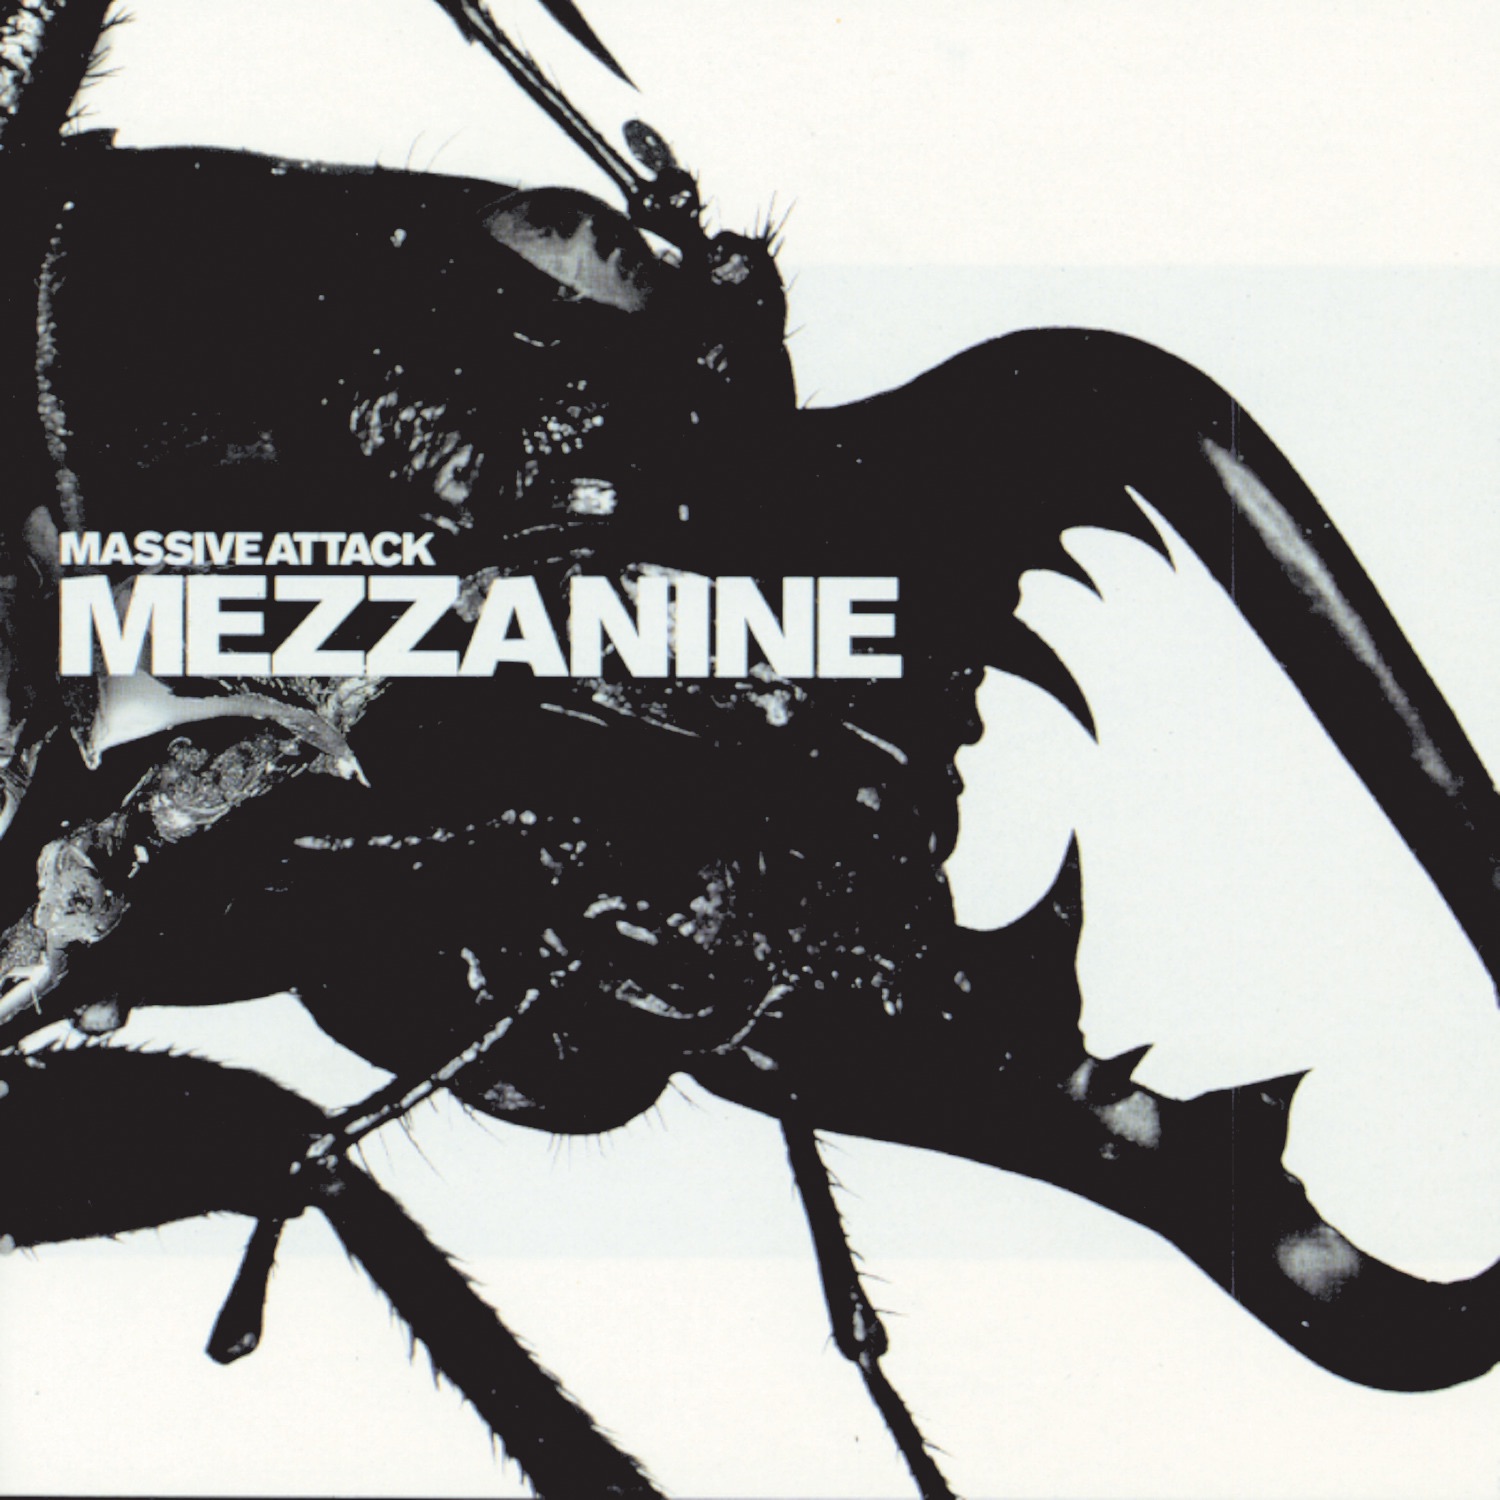 Art for Teardrop by Massive Attack